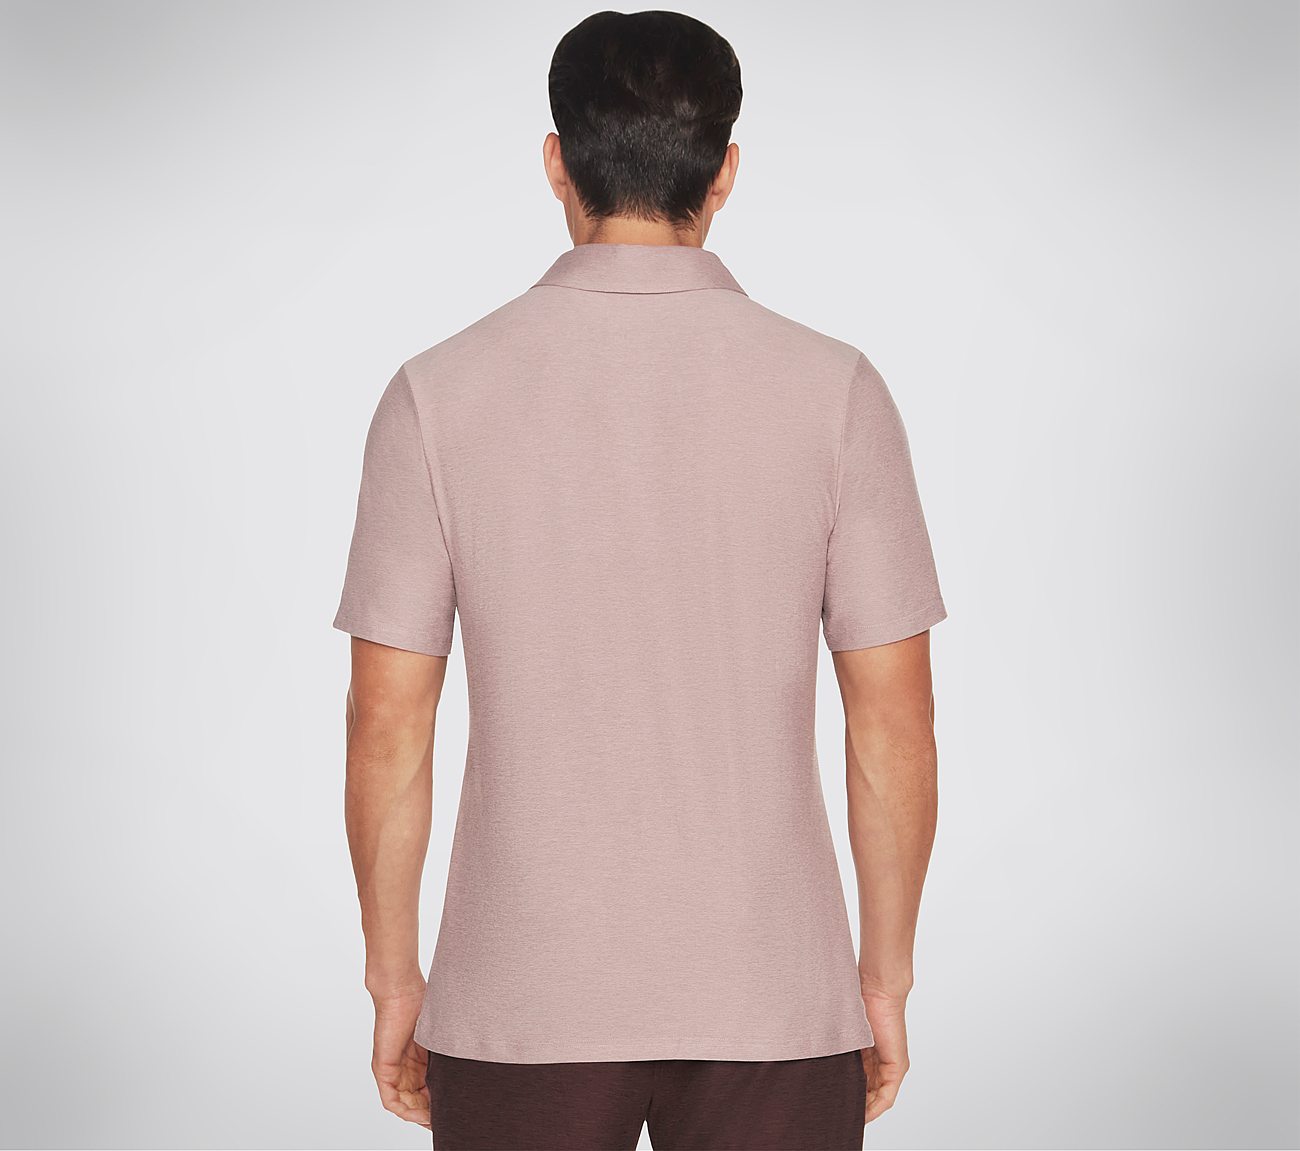 GODRI ALL DAY POLO, TAUPE/LAVENDER Apparels Top View